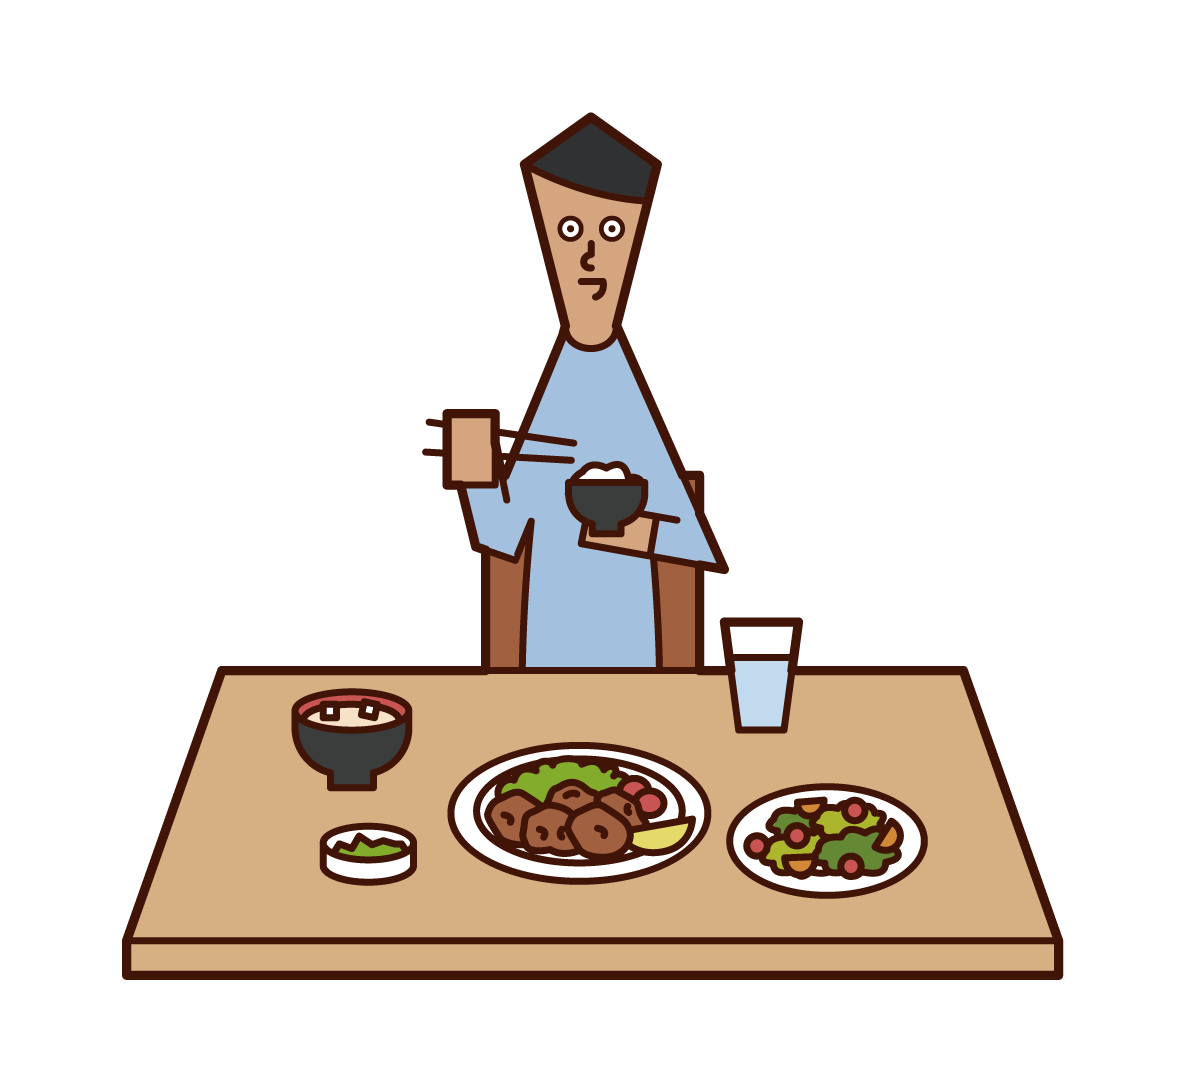 Illustration of the person (man) who eats